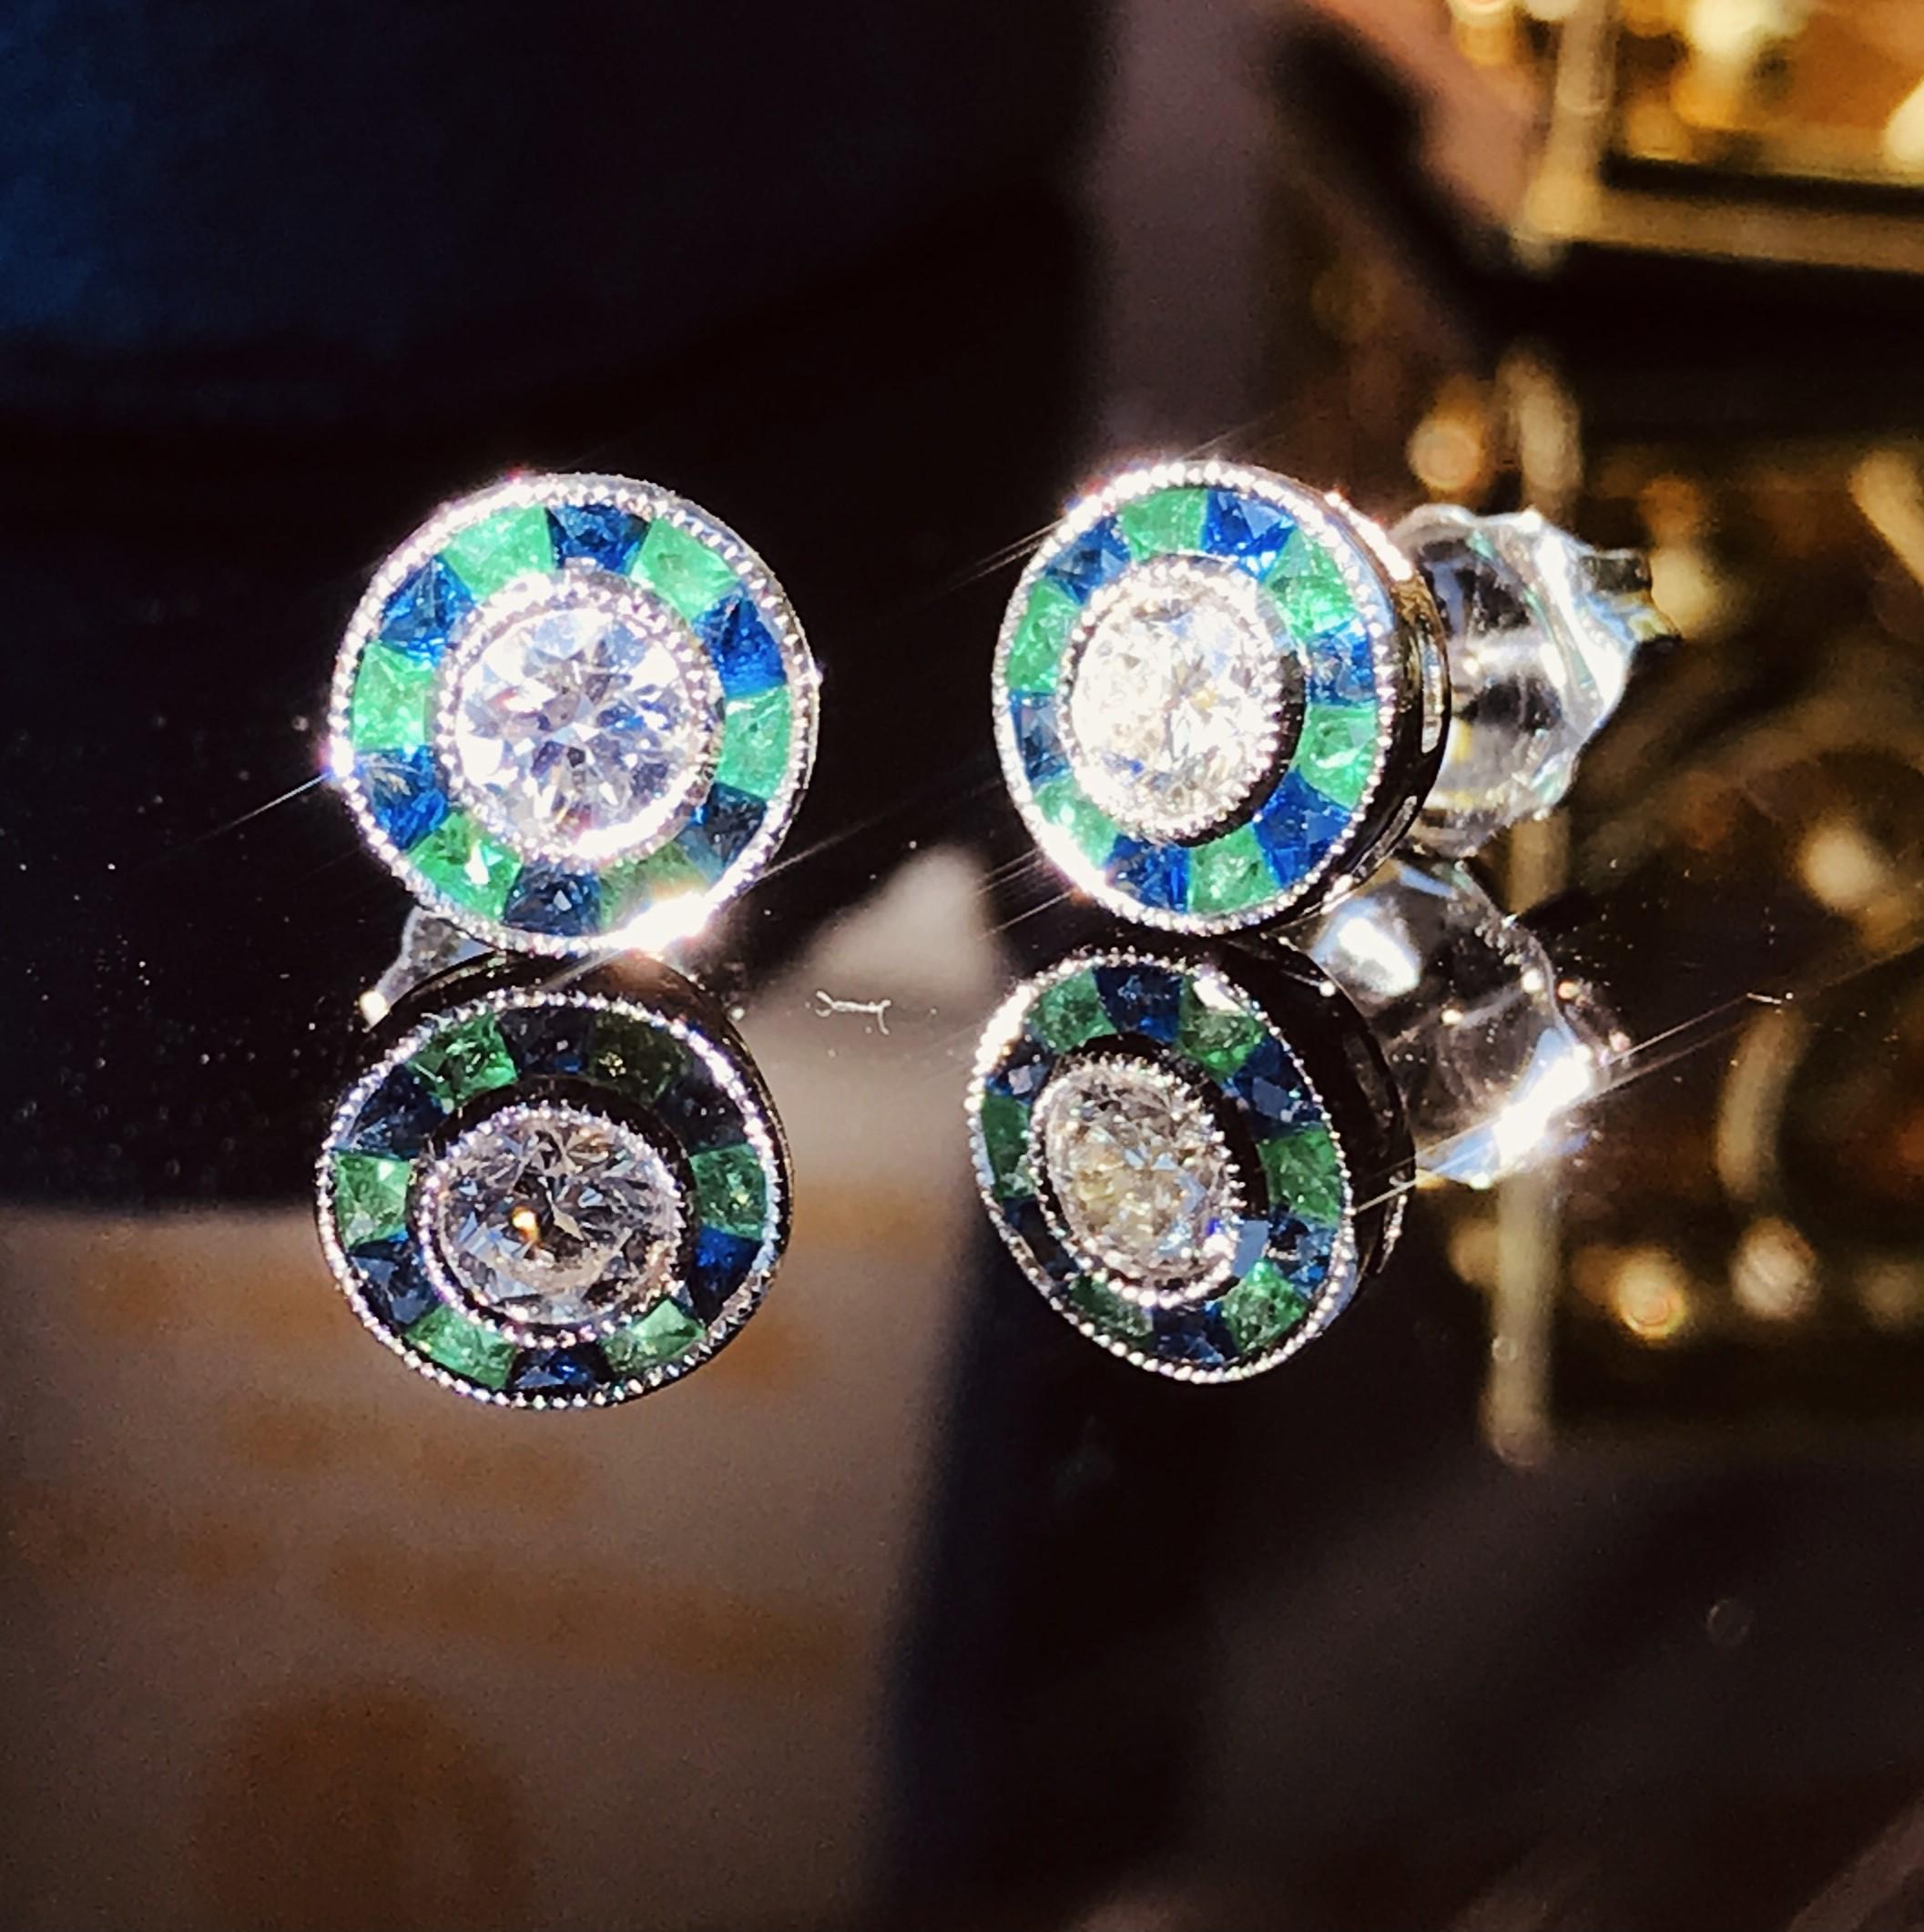 A diamond with emerald and sapphire target earrings, rub-over-set to the center with a round brilliant cut diamond surrounded by French cut emeralds and sapphires, all set in 18k white gold. A gorgeous diamond with emerald and sapphire target